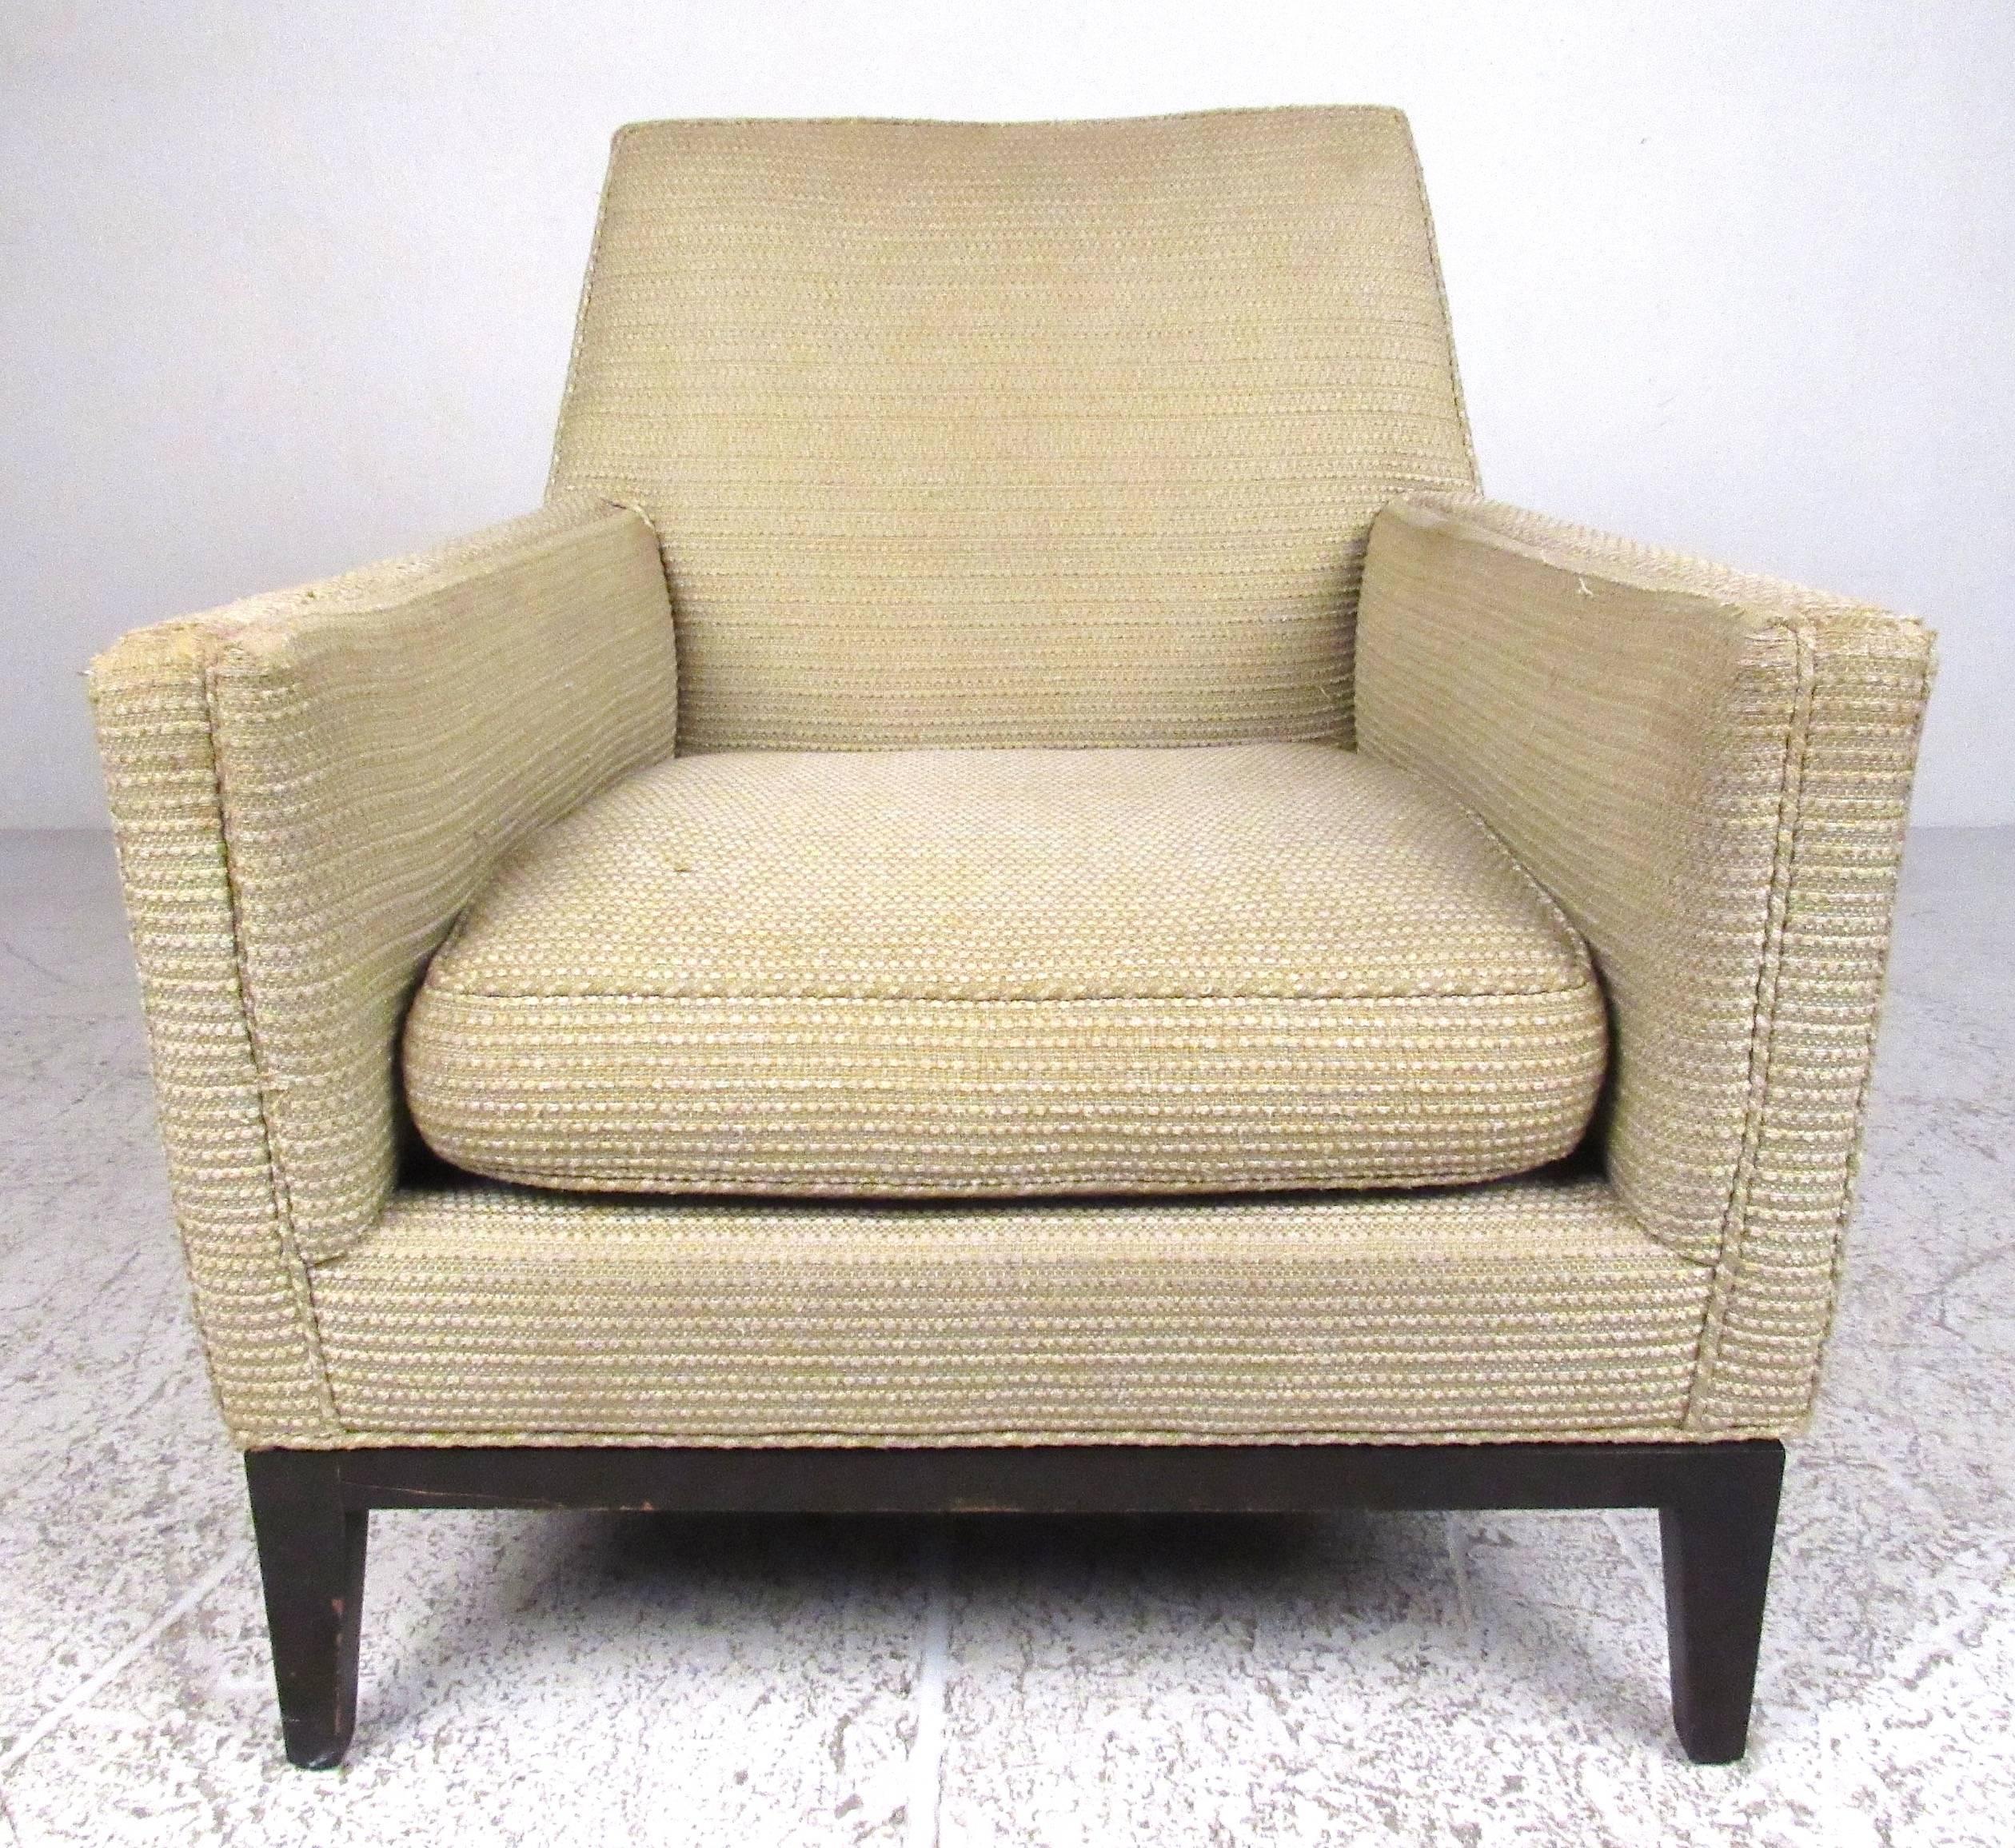 Classic Edward Wormley for Dunbar lounge chair, circa 1968.
Please confirm item location (NY or NJ) with dealer.
 